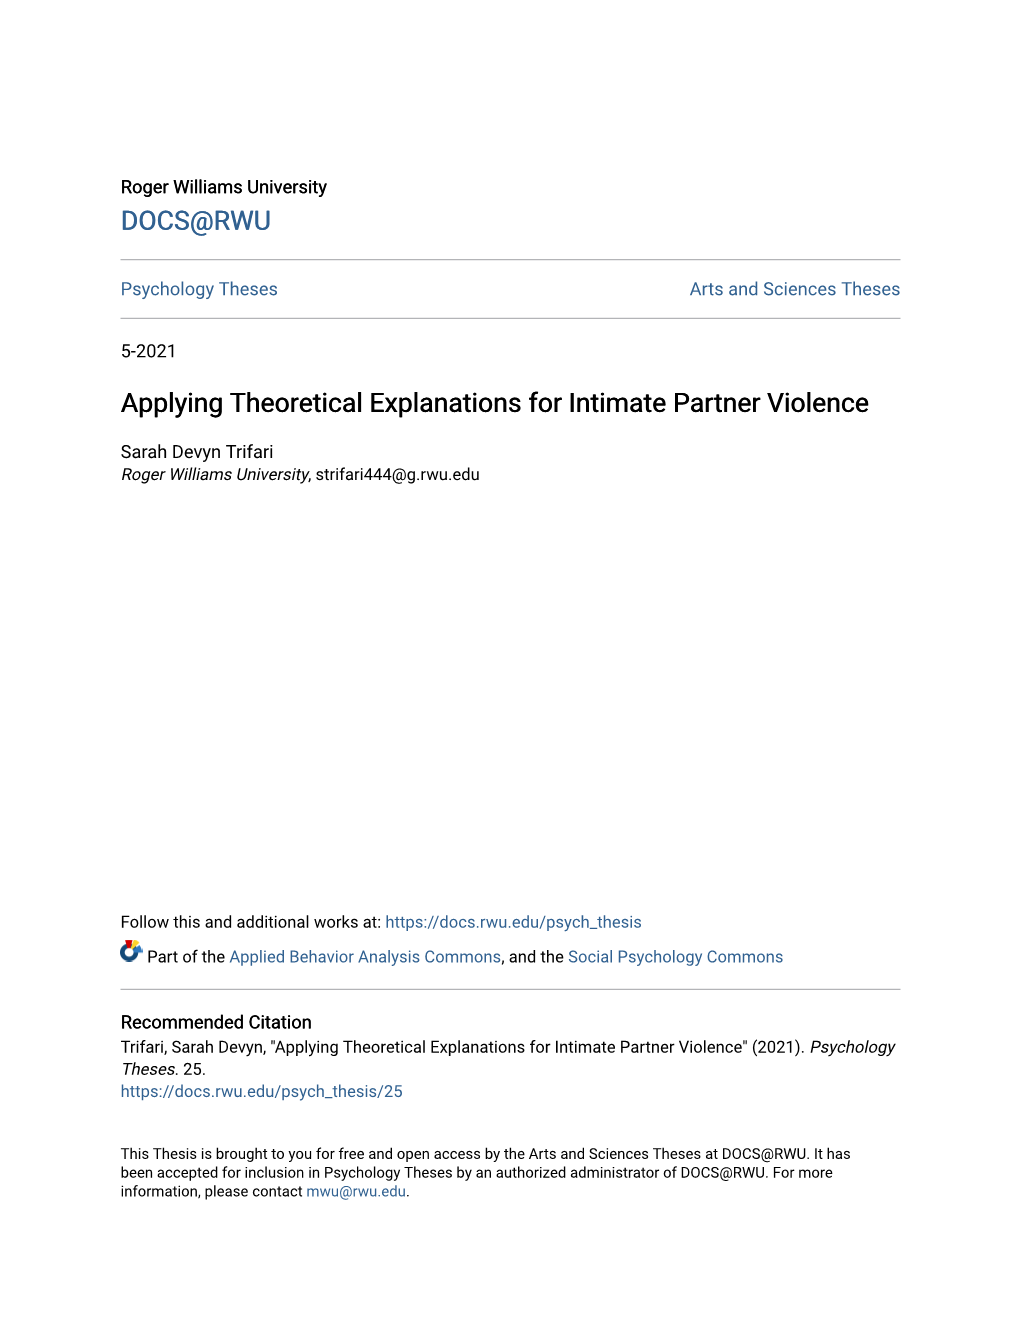 Applying Theoretical Explanations for Intimate Partner Violence